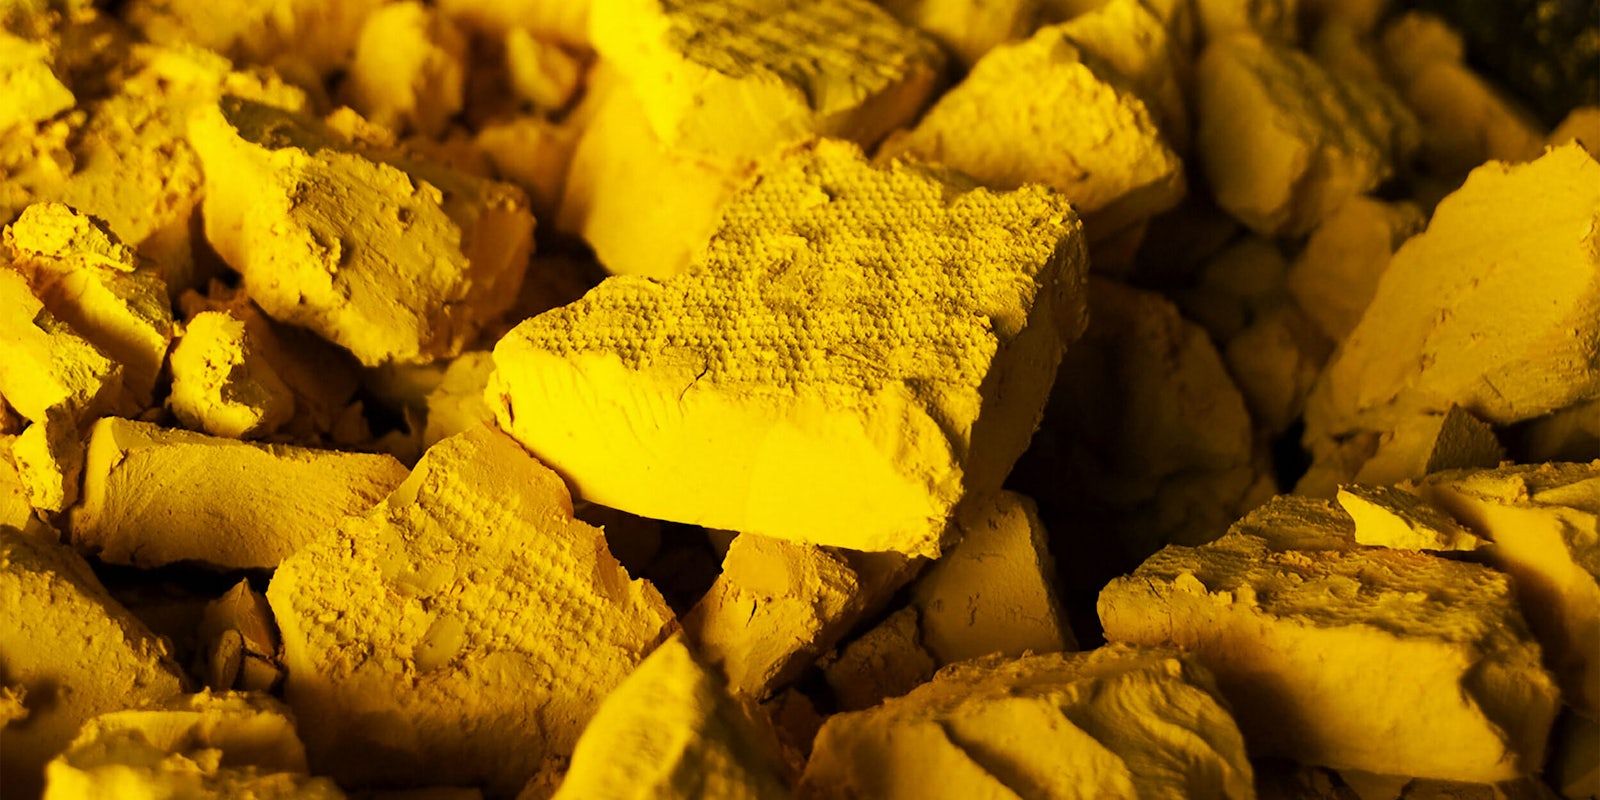 A photo of yellow cake uranium, a solid form of uranium oxide produced from uranium ore.